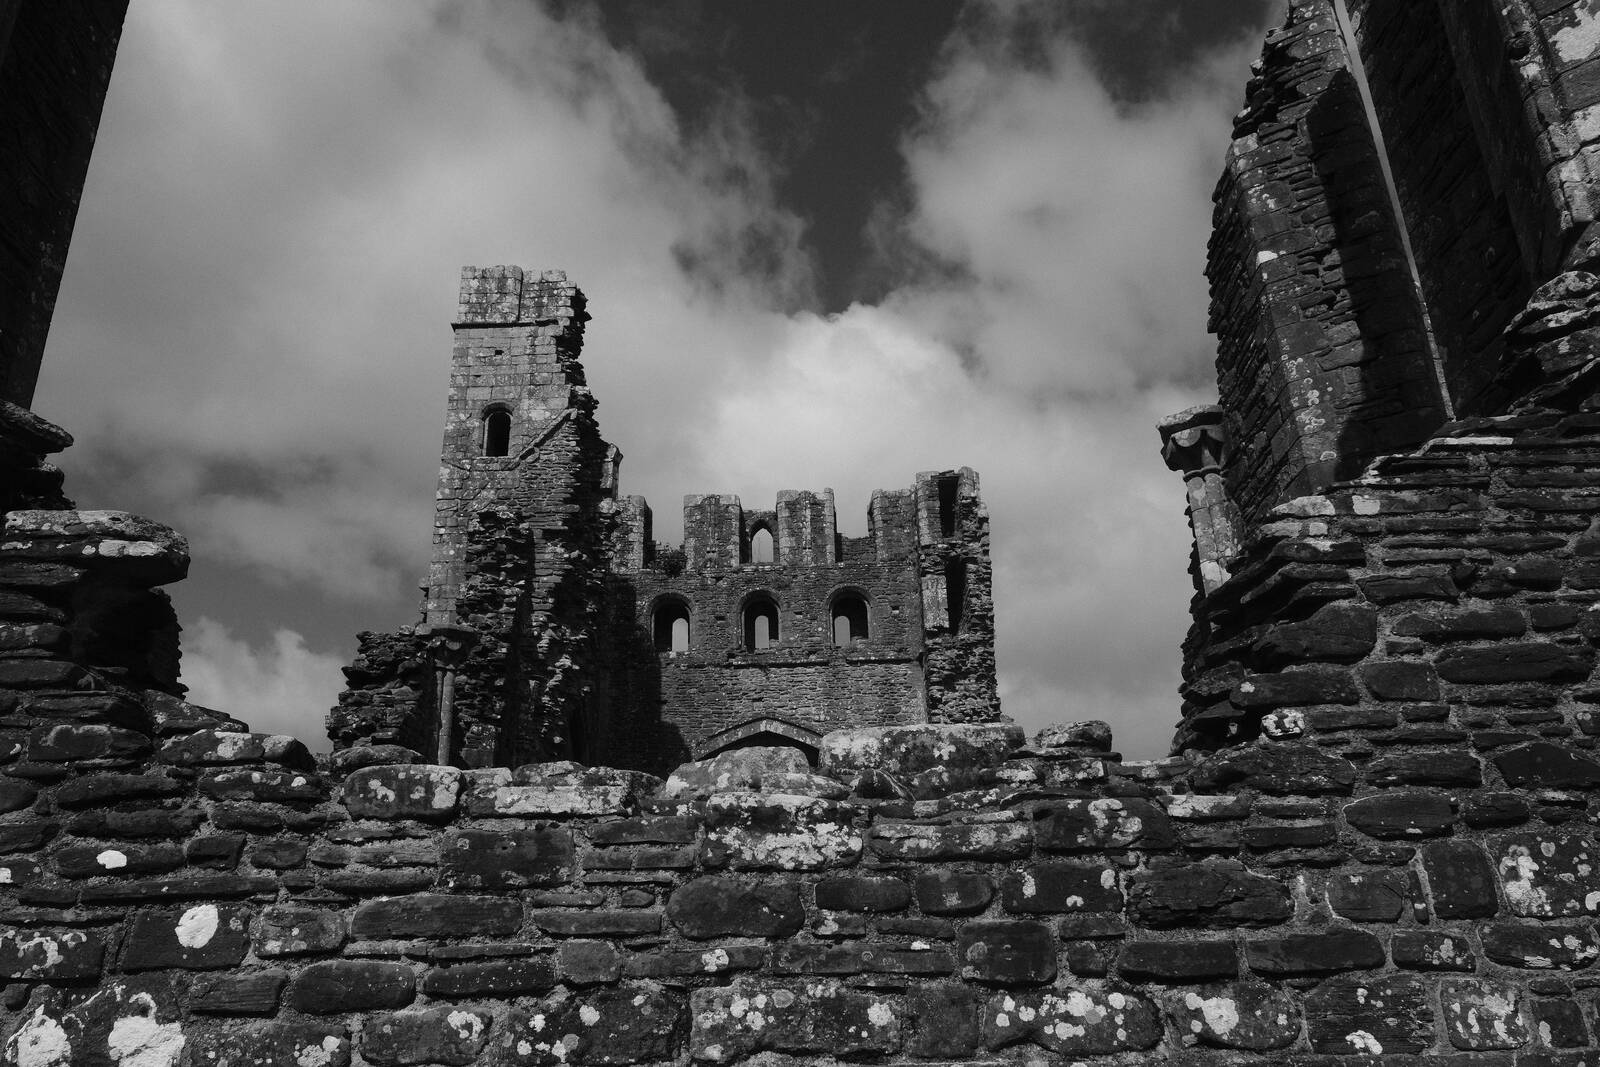 Image of Llanthony Priory by Andreas Marjoram